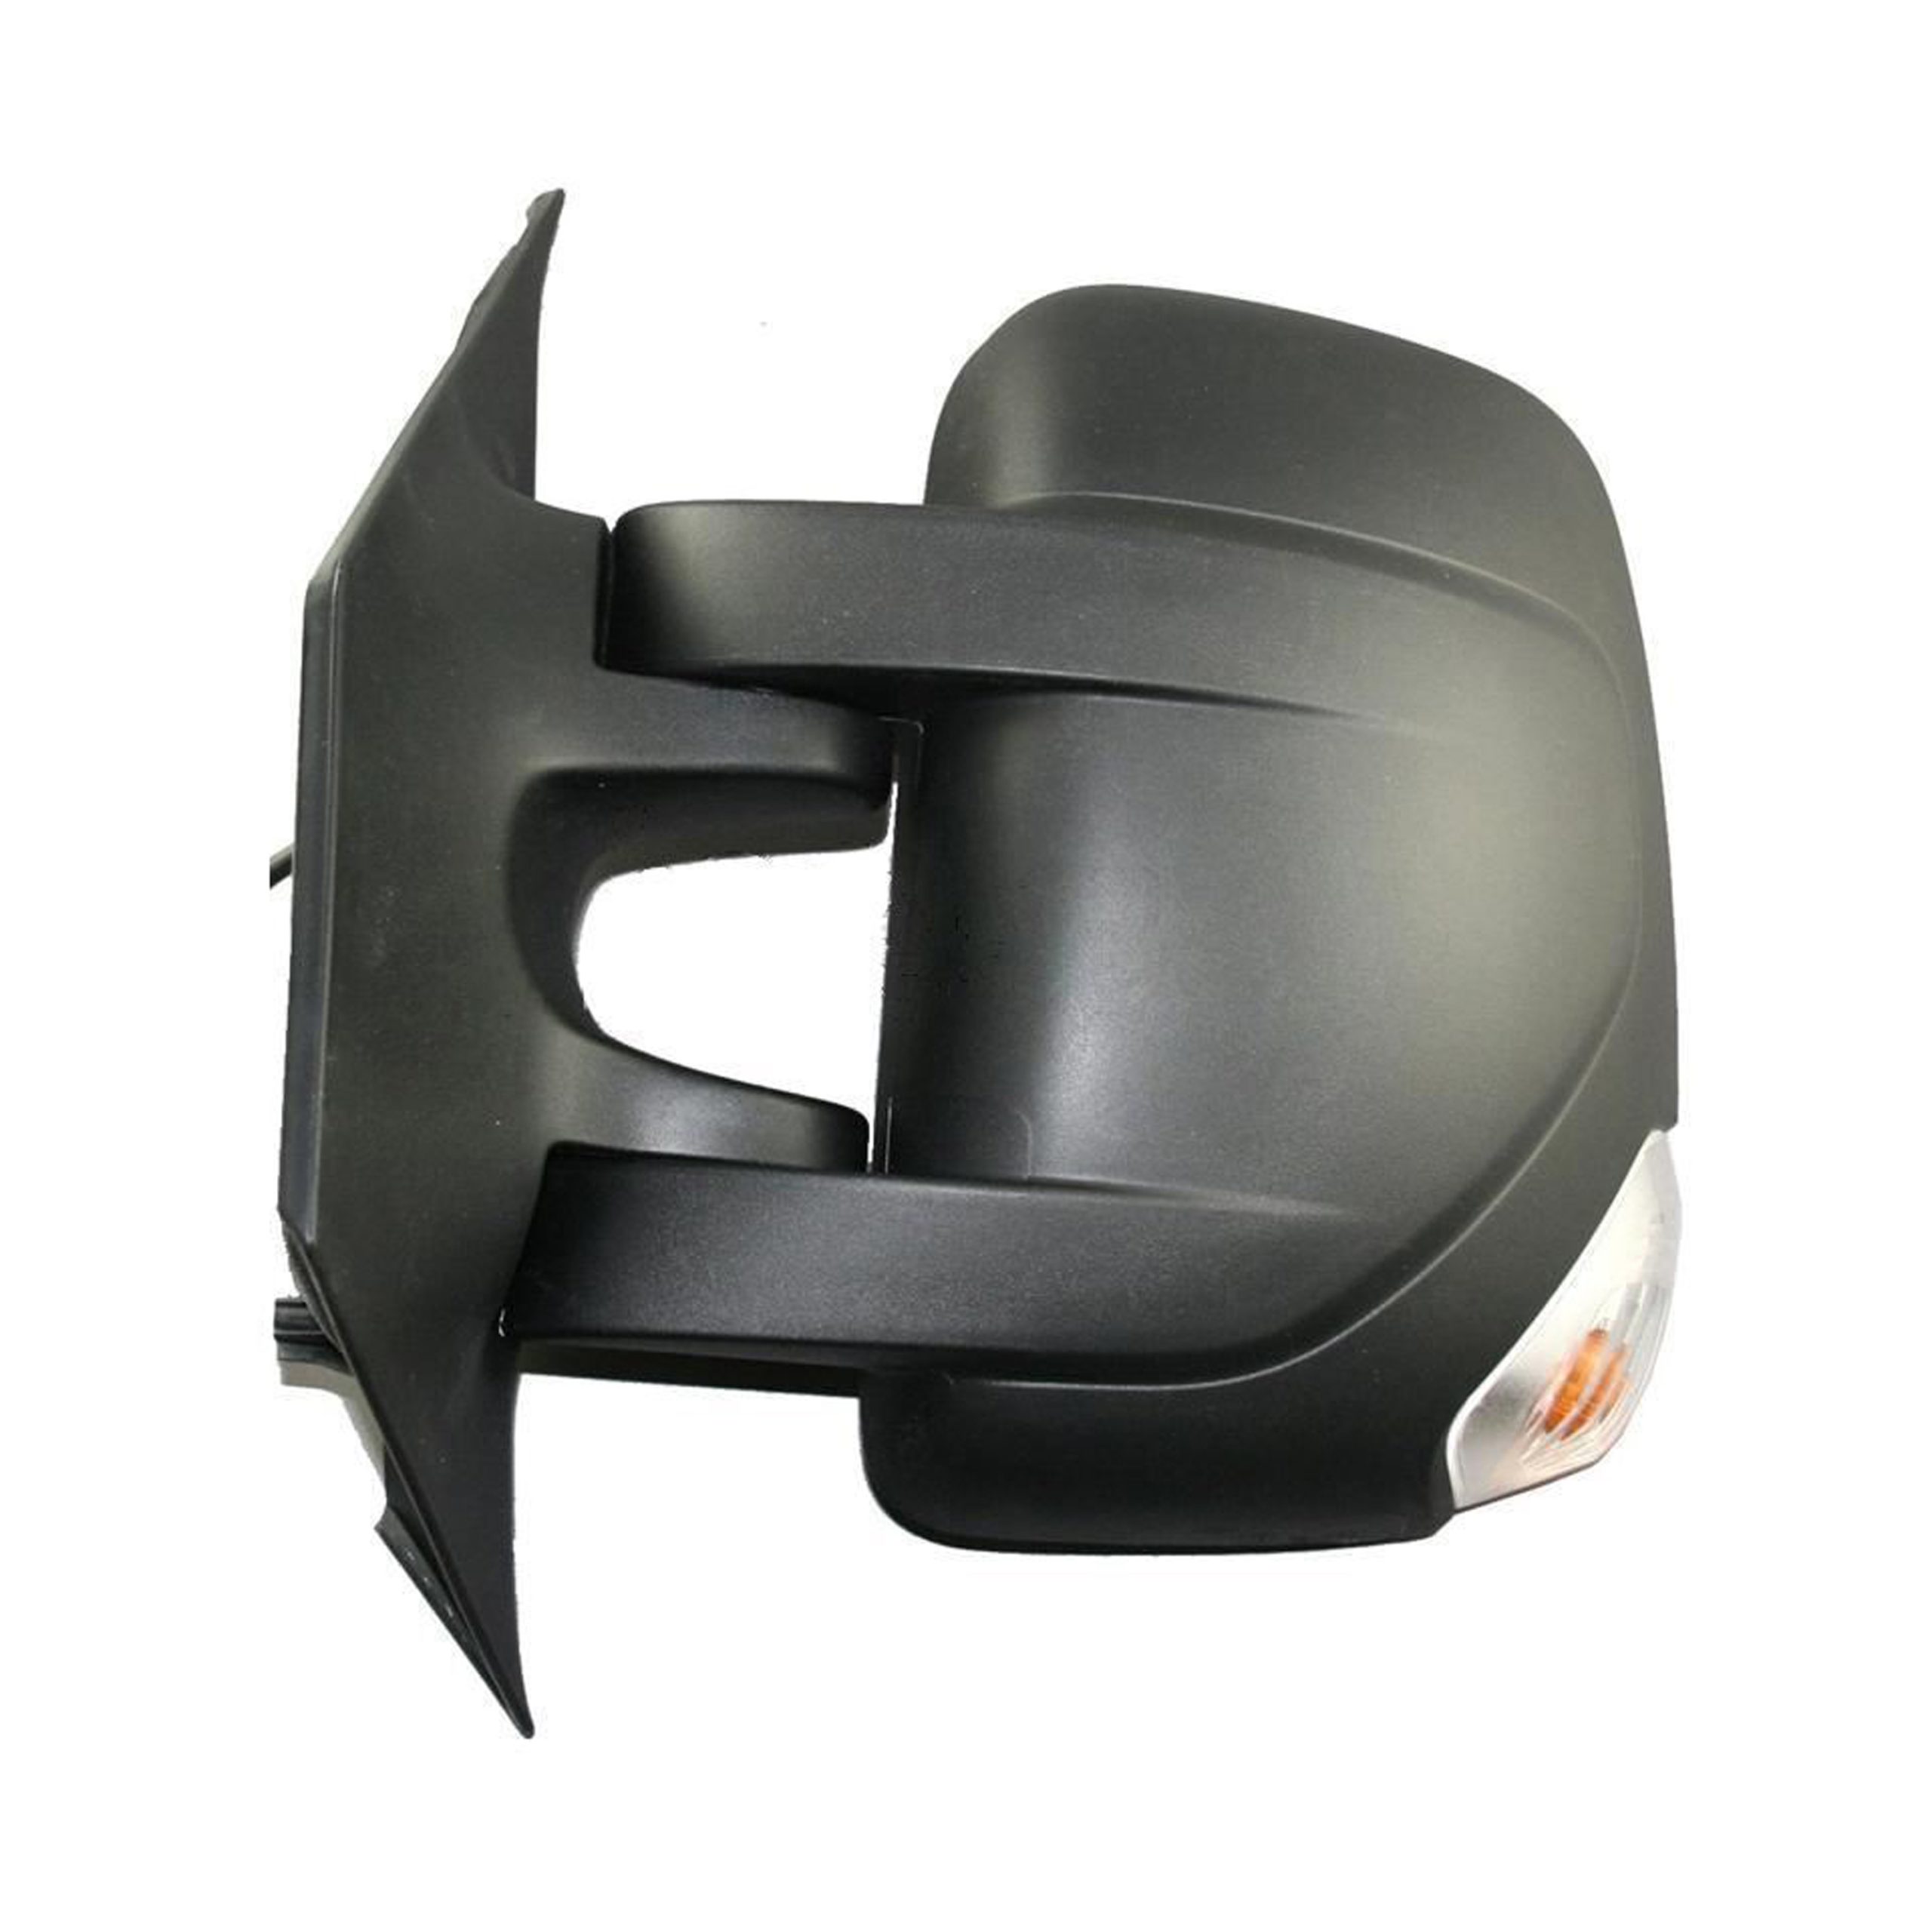 Renault Master Complete Wing Mirror Unit LEFT HAND ( UK Passenger Side ) 2011 to 2020 – Manual Wing Mirror Unit ( SHORT Arm )